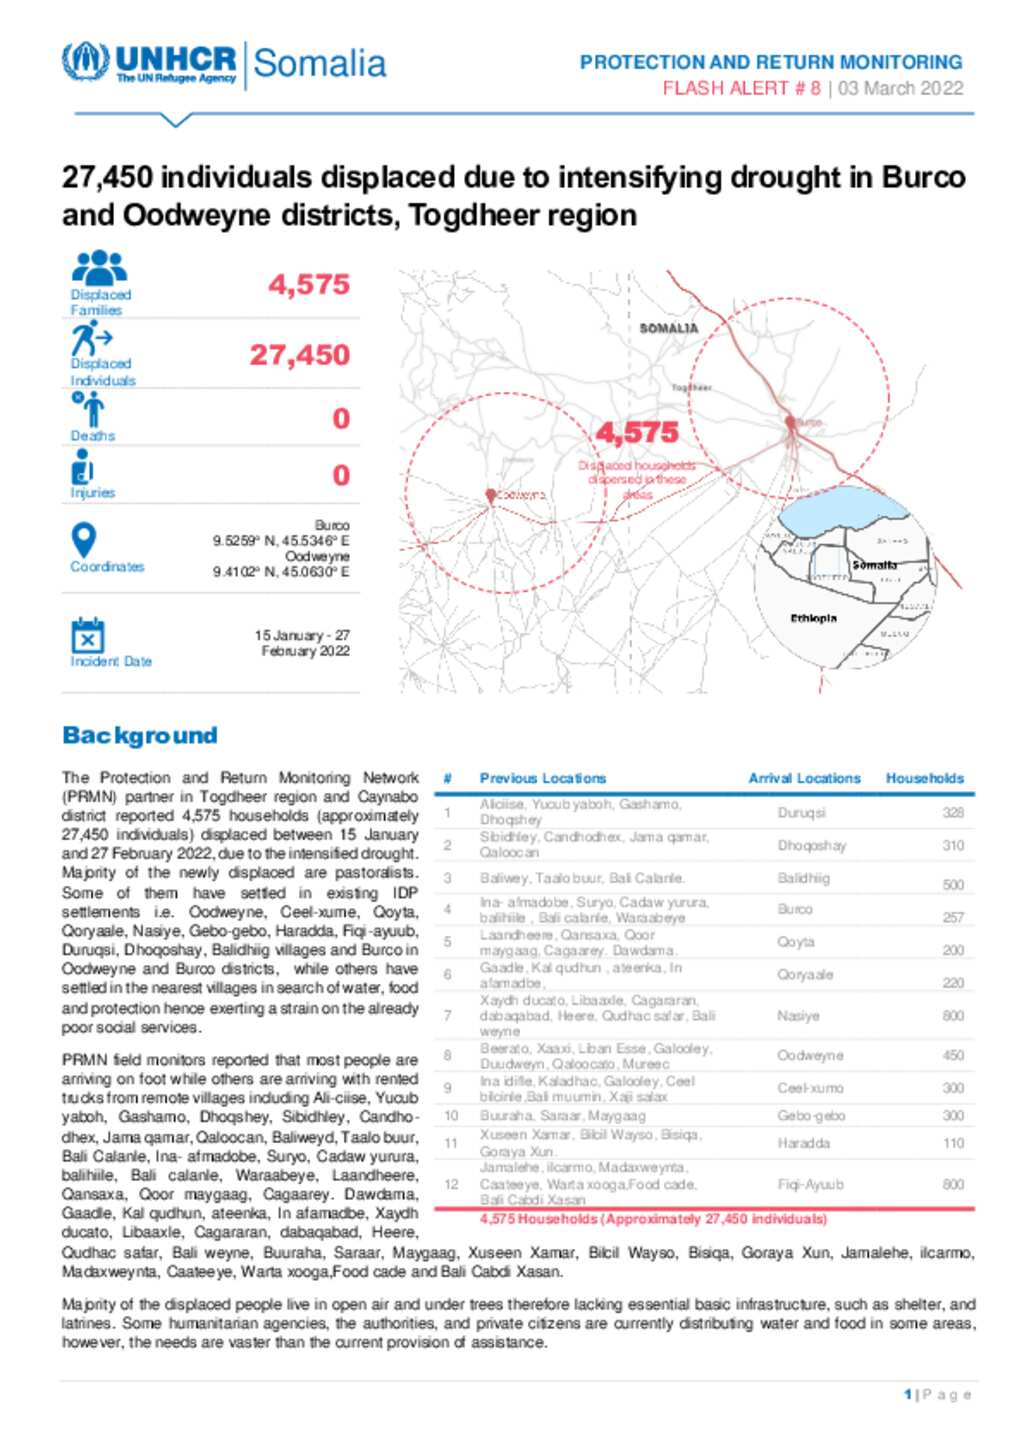 Document - Unhcr Flash Report #8 - Displacment Due To Intensifying Drought  In Togdheer Region